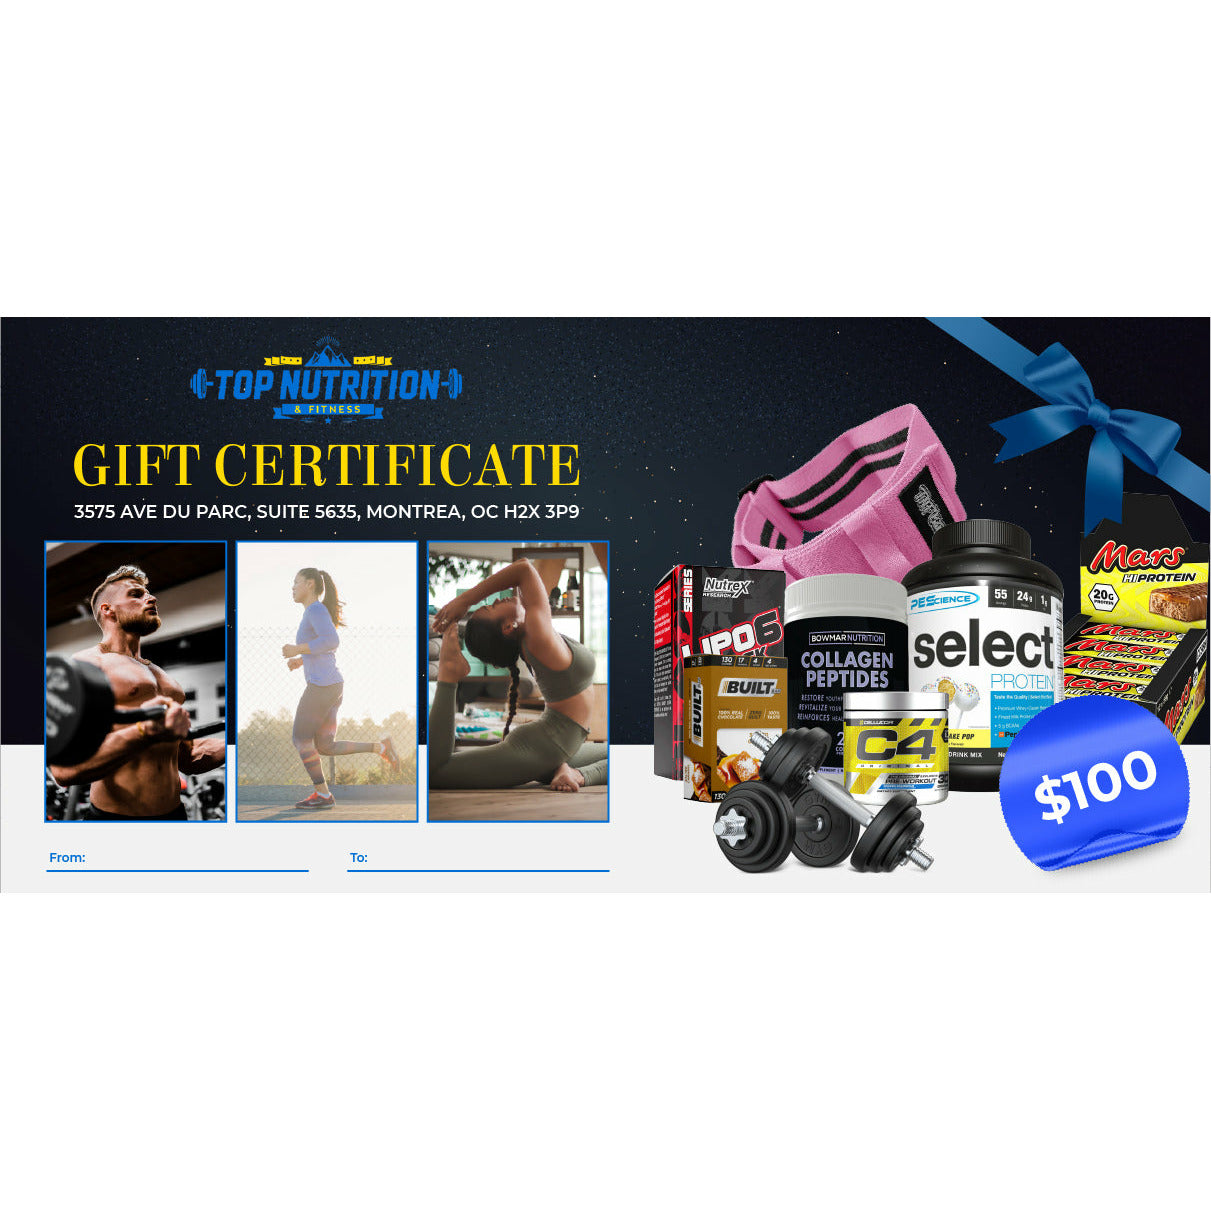 Top Nutrition & Fitness E-Gift Card works online & in store topnutritionandfitness Top Nutrition Canada